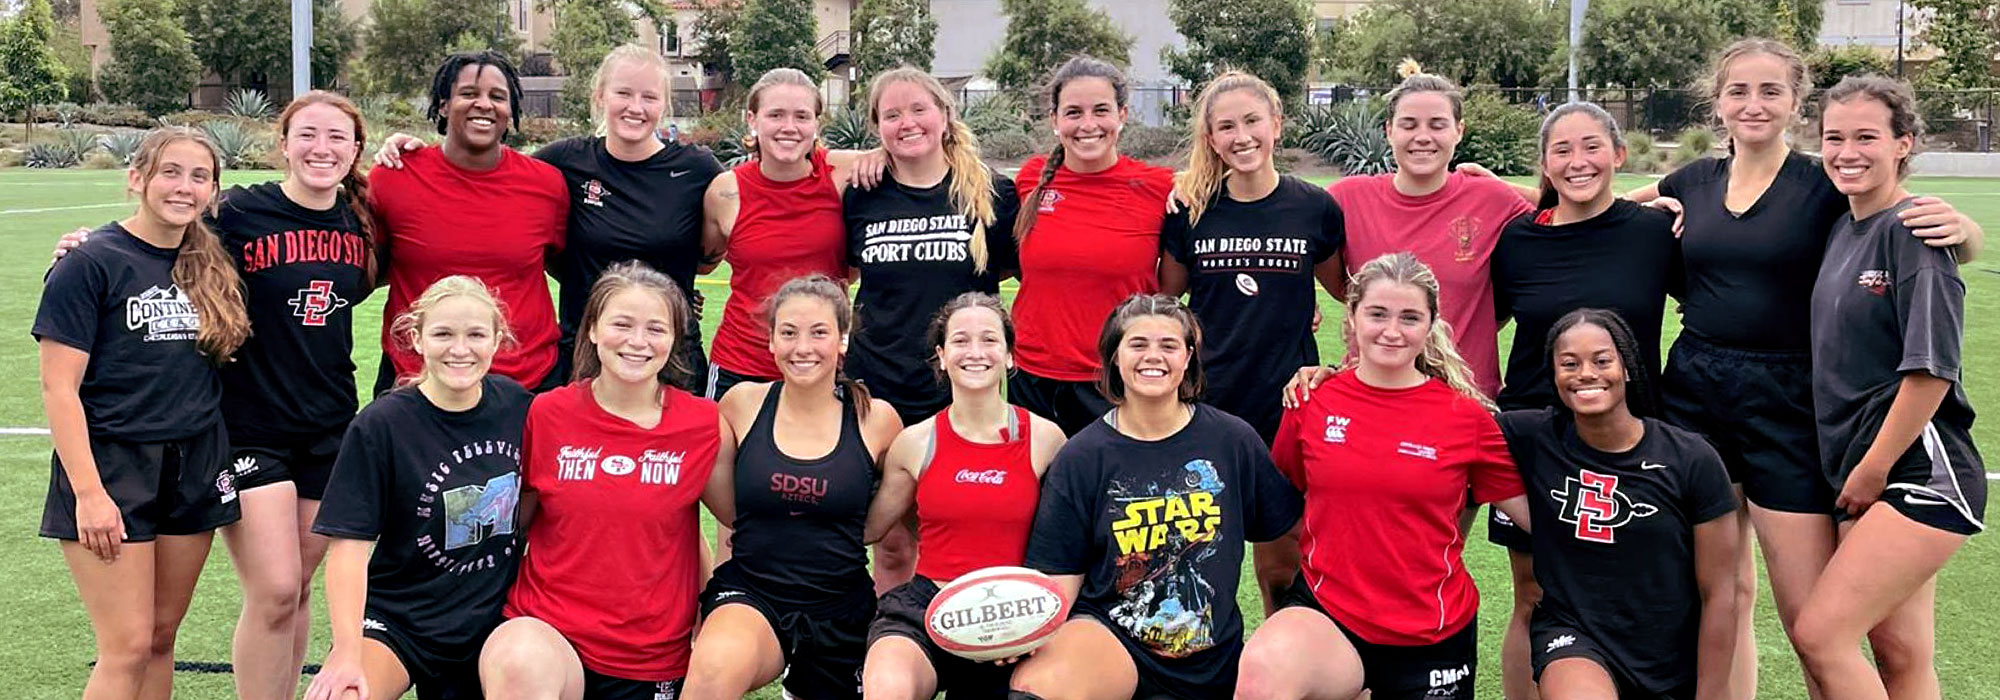 Womens Rugby Club Roster Sport Clubs Aztec Recreation As San Diego State University 5069